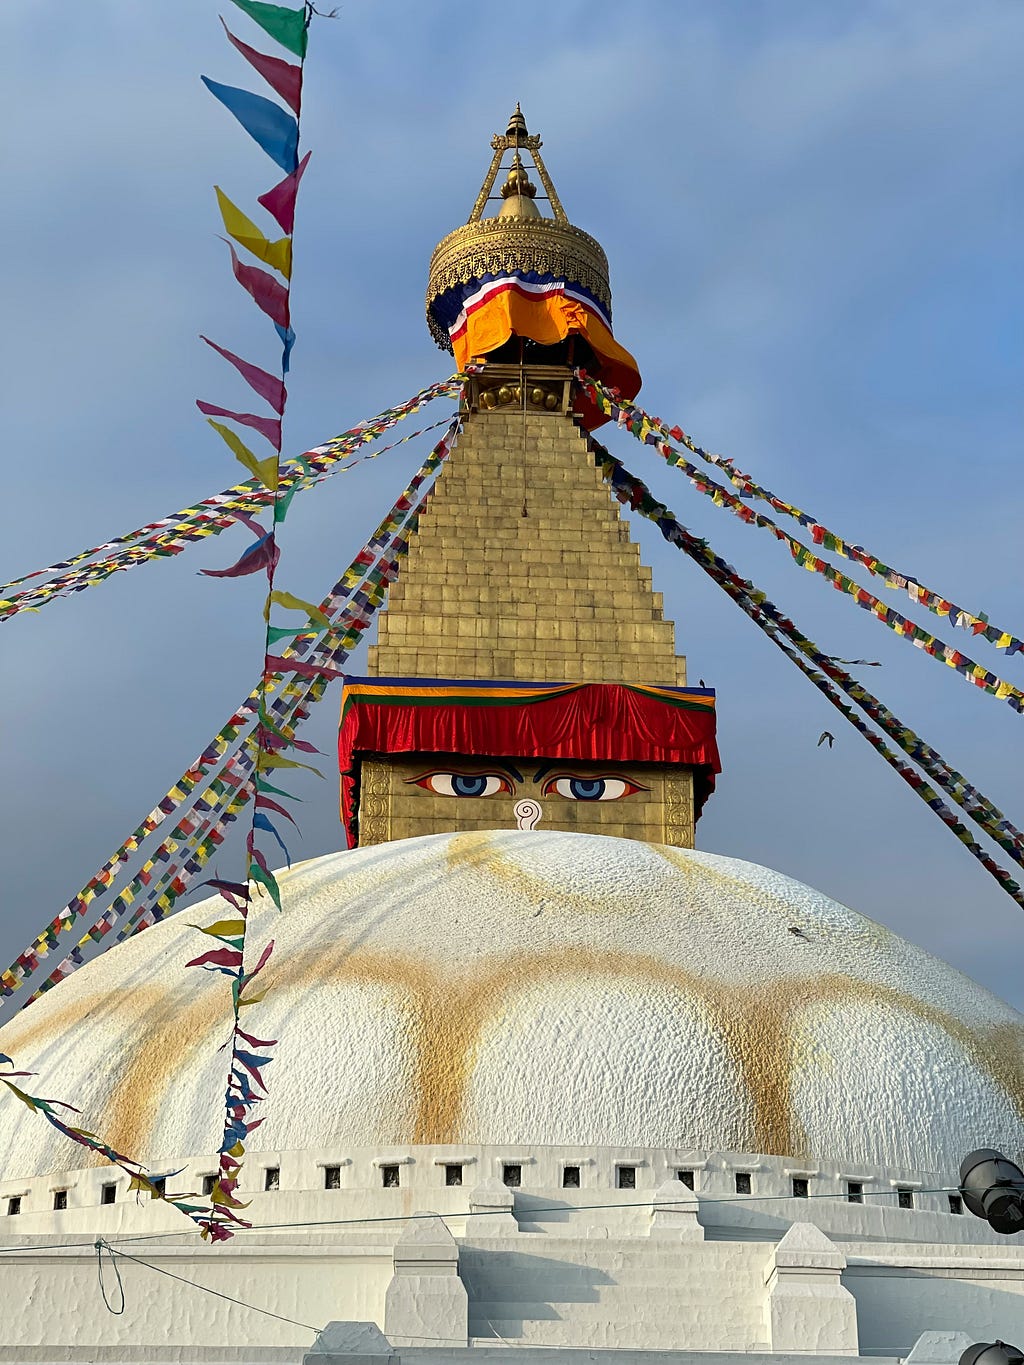 Large Buddhist Stupa (round concrete dome) with the Buddha eyes looking over the top of the dome. The eyes are part of the large gold-colored pyramid rising from the dome and there are many prayer flags strung around the stupa from the top of the pyramid.